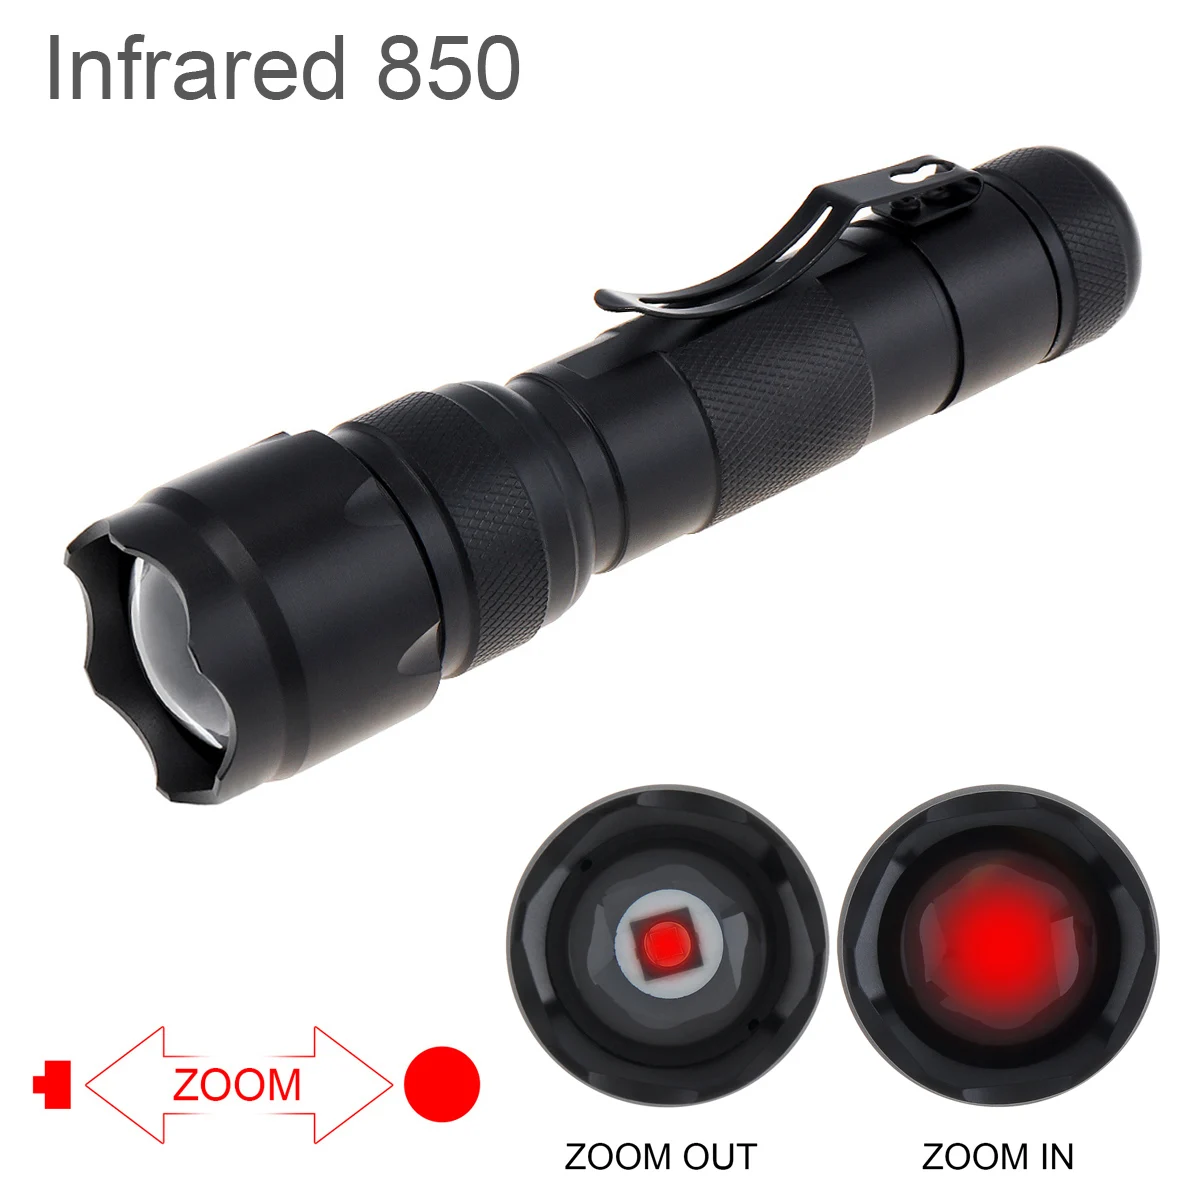 

502F Mini LED Infrared IR 850nm Night Vision Zoom Flashlight Handheld Waterproof and Shockproof Flashlight for Hunting Outdoor